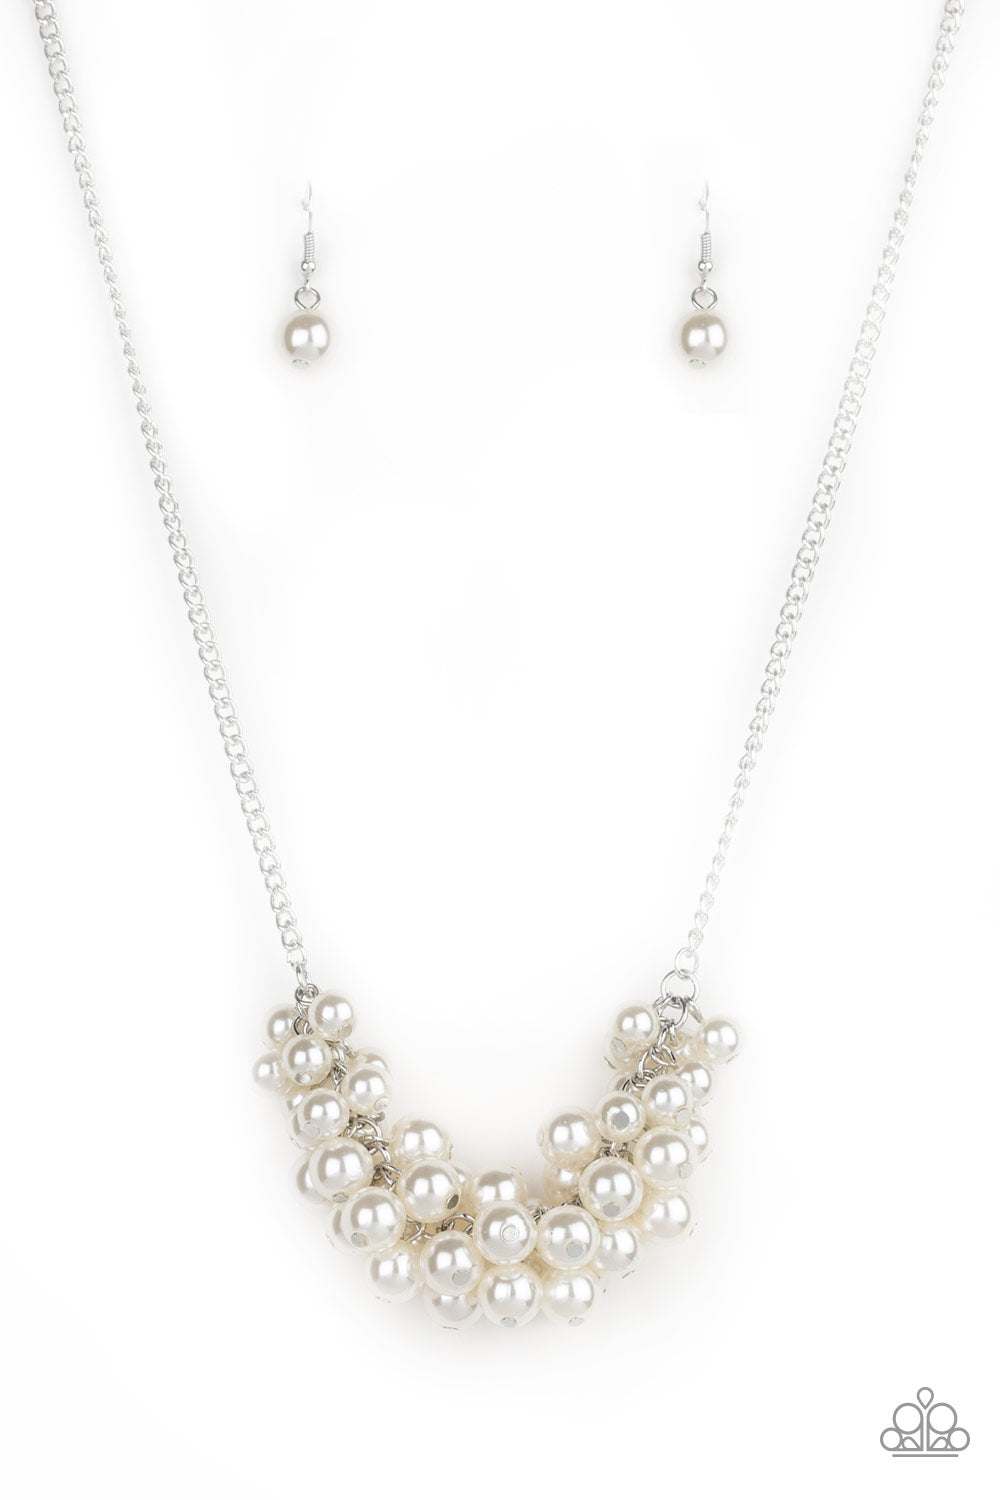 Grandiose Glimmer - White Pearl and Silver Necklace - Paparazzi Accessories - Bubbly white pearls dangle from the bottom of a glistening silver chain, creating a glamorously clustered display below the collar. Features an adjustable clasp closure.